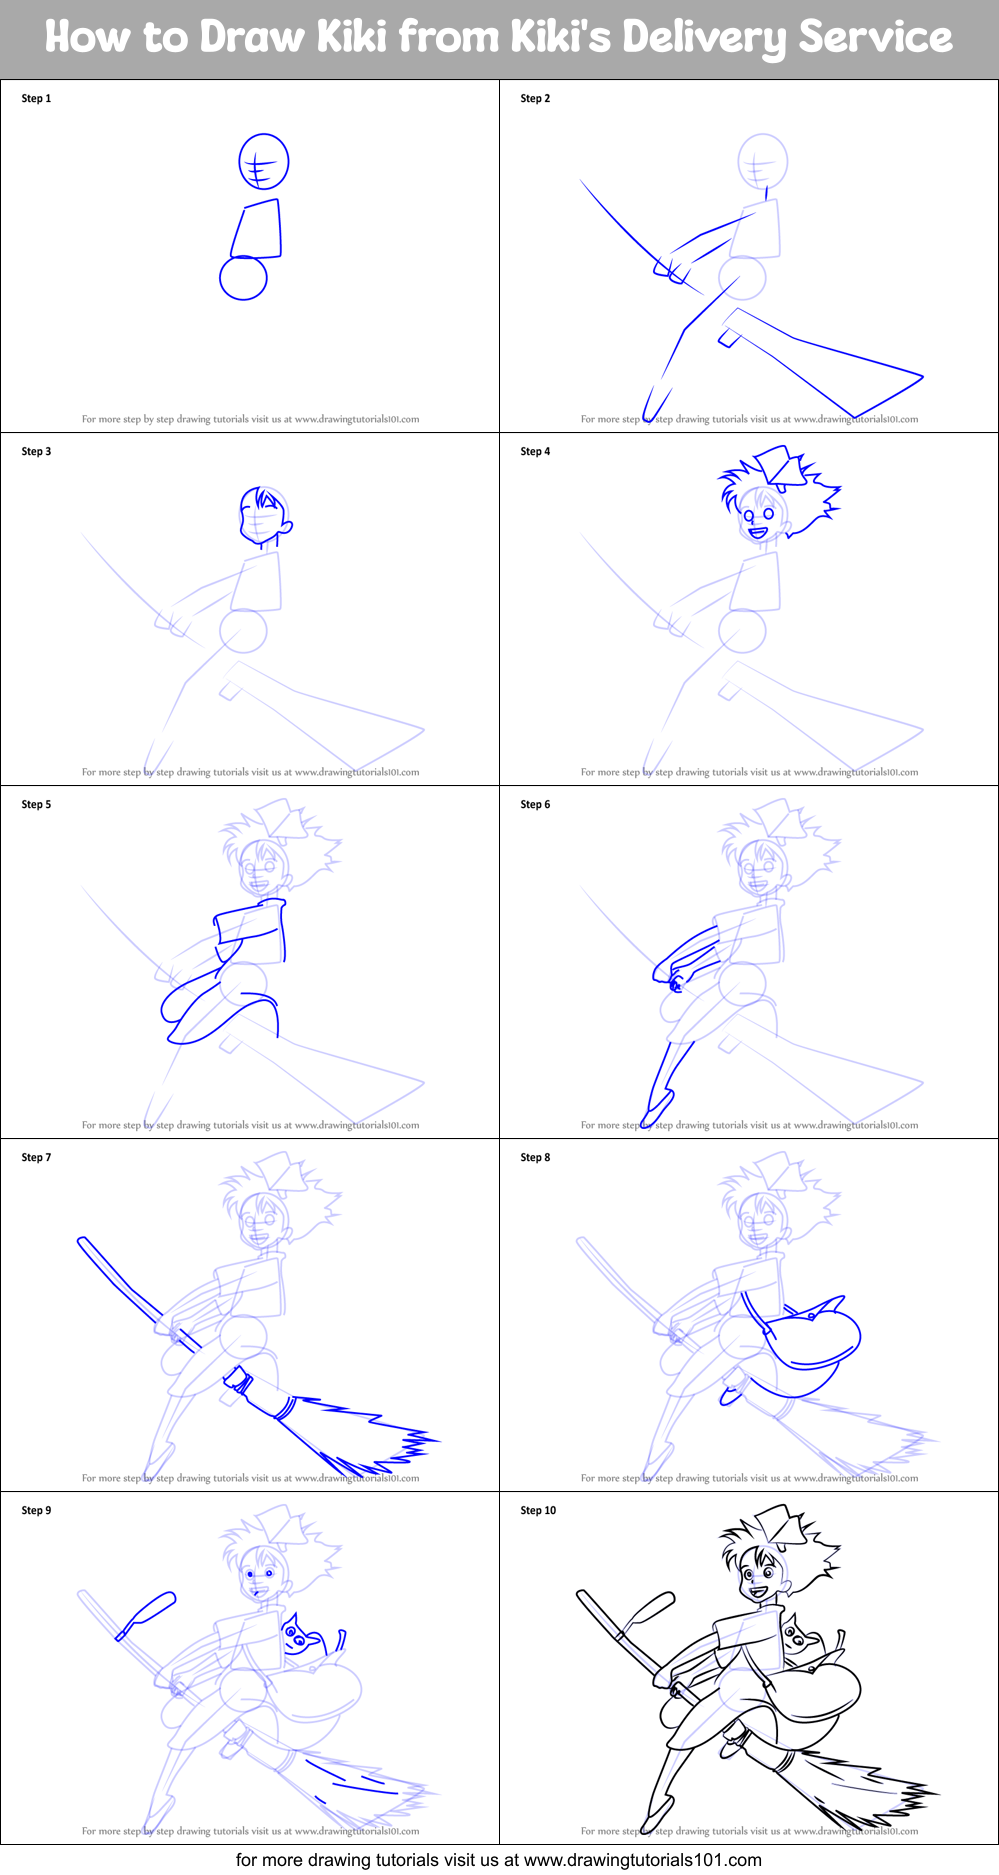 How to Draw Kiki from Kiki's Delivery Service printable step by step